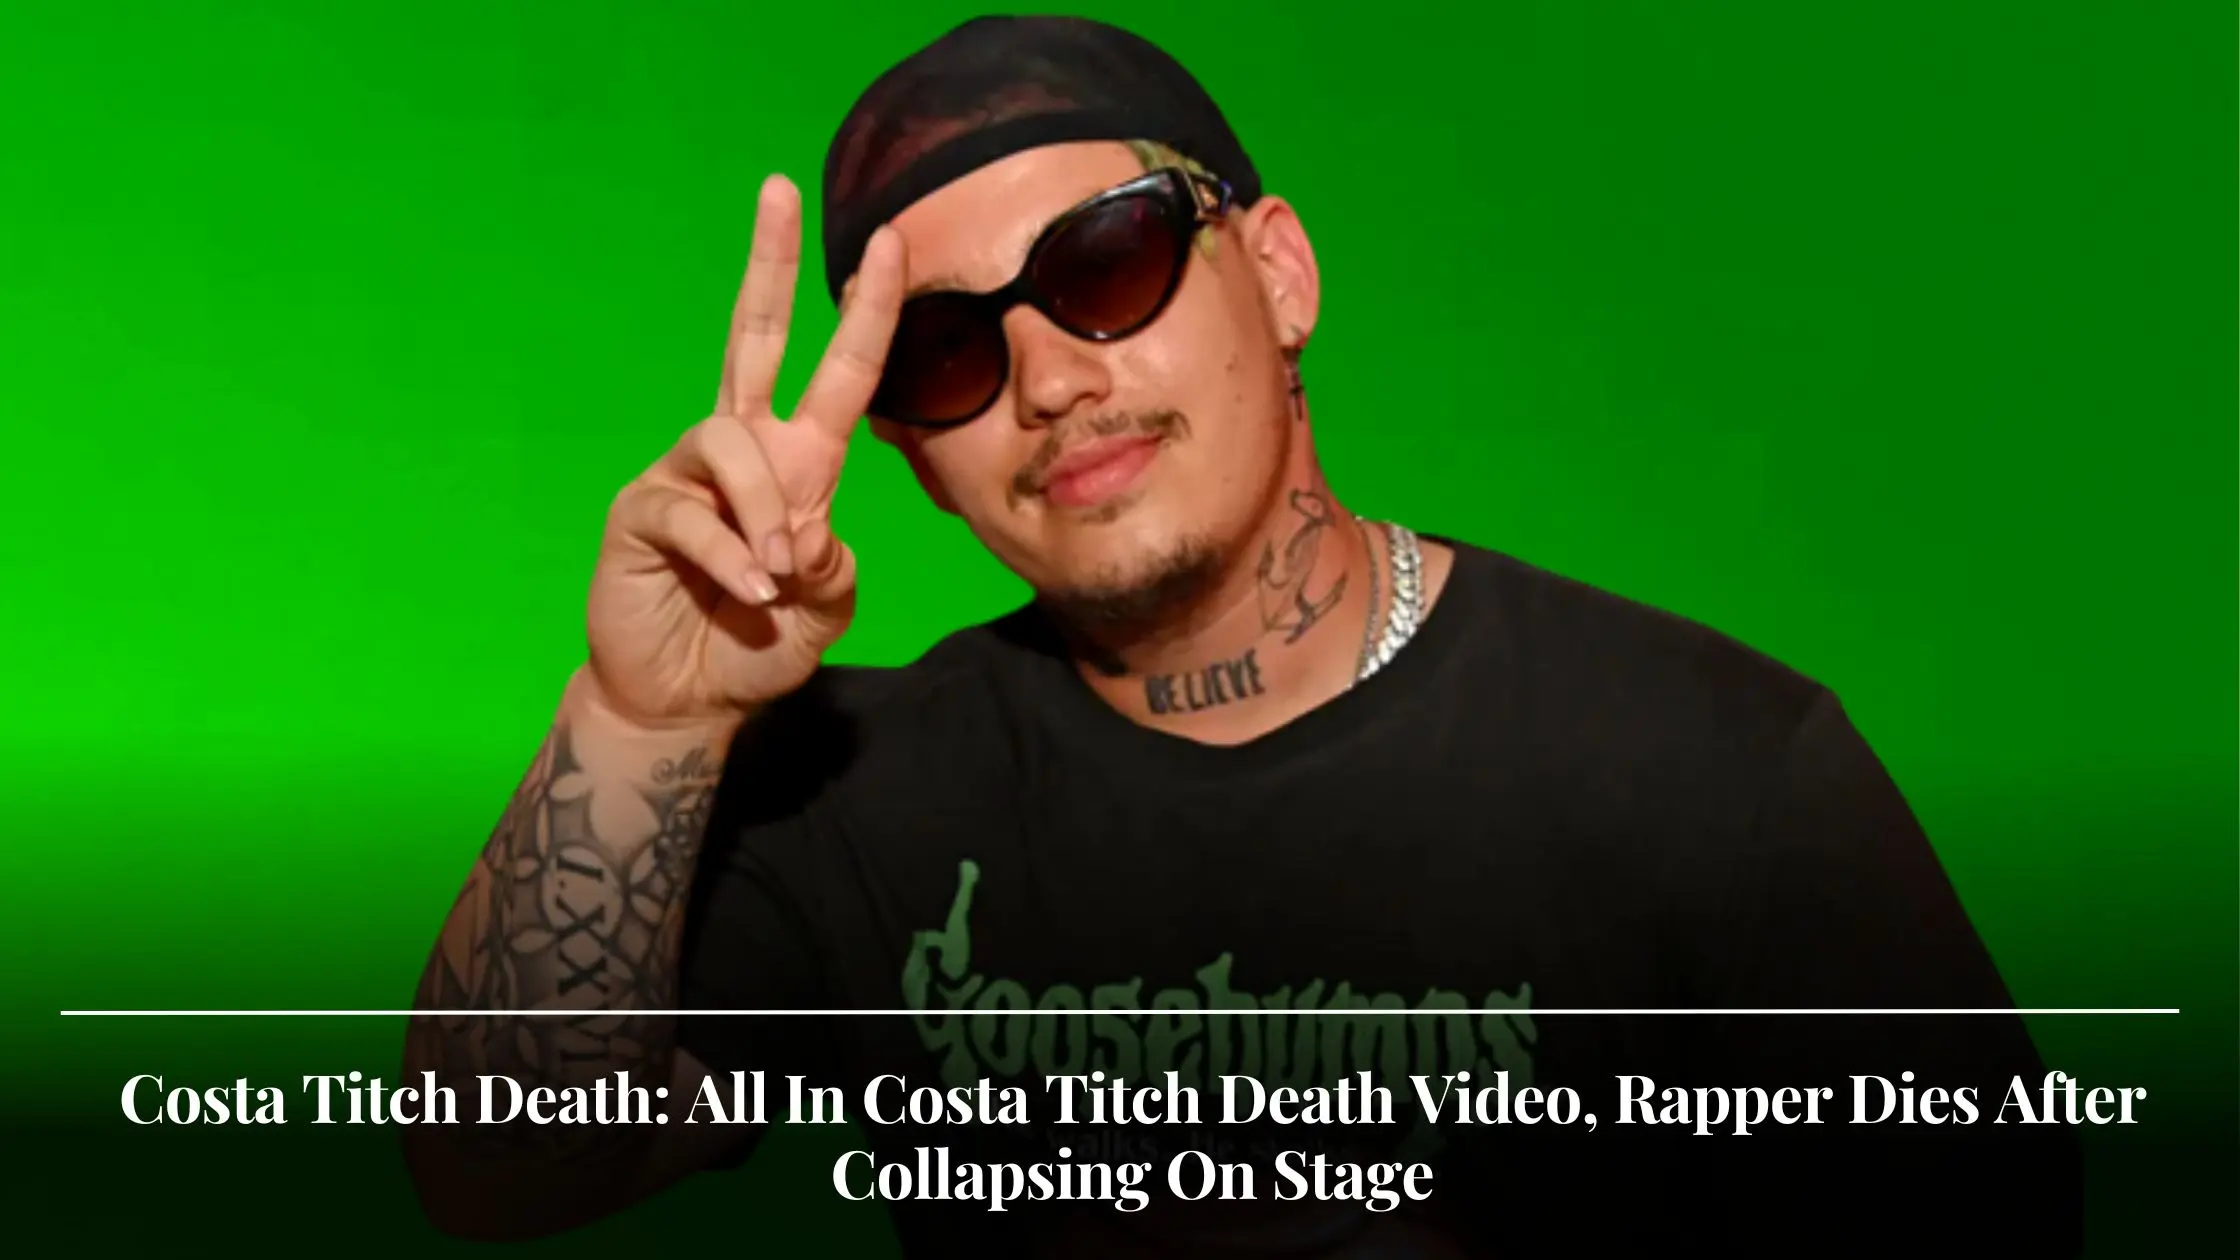 Costa Titch Death All In Costa Titch Death Video, Rapper Dies After Collapsing On Stage